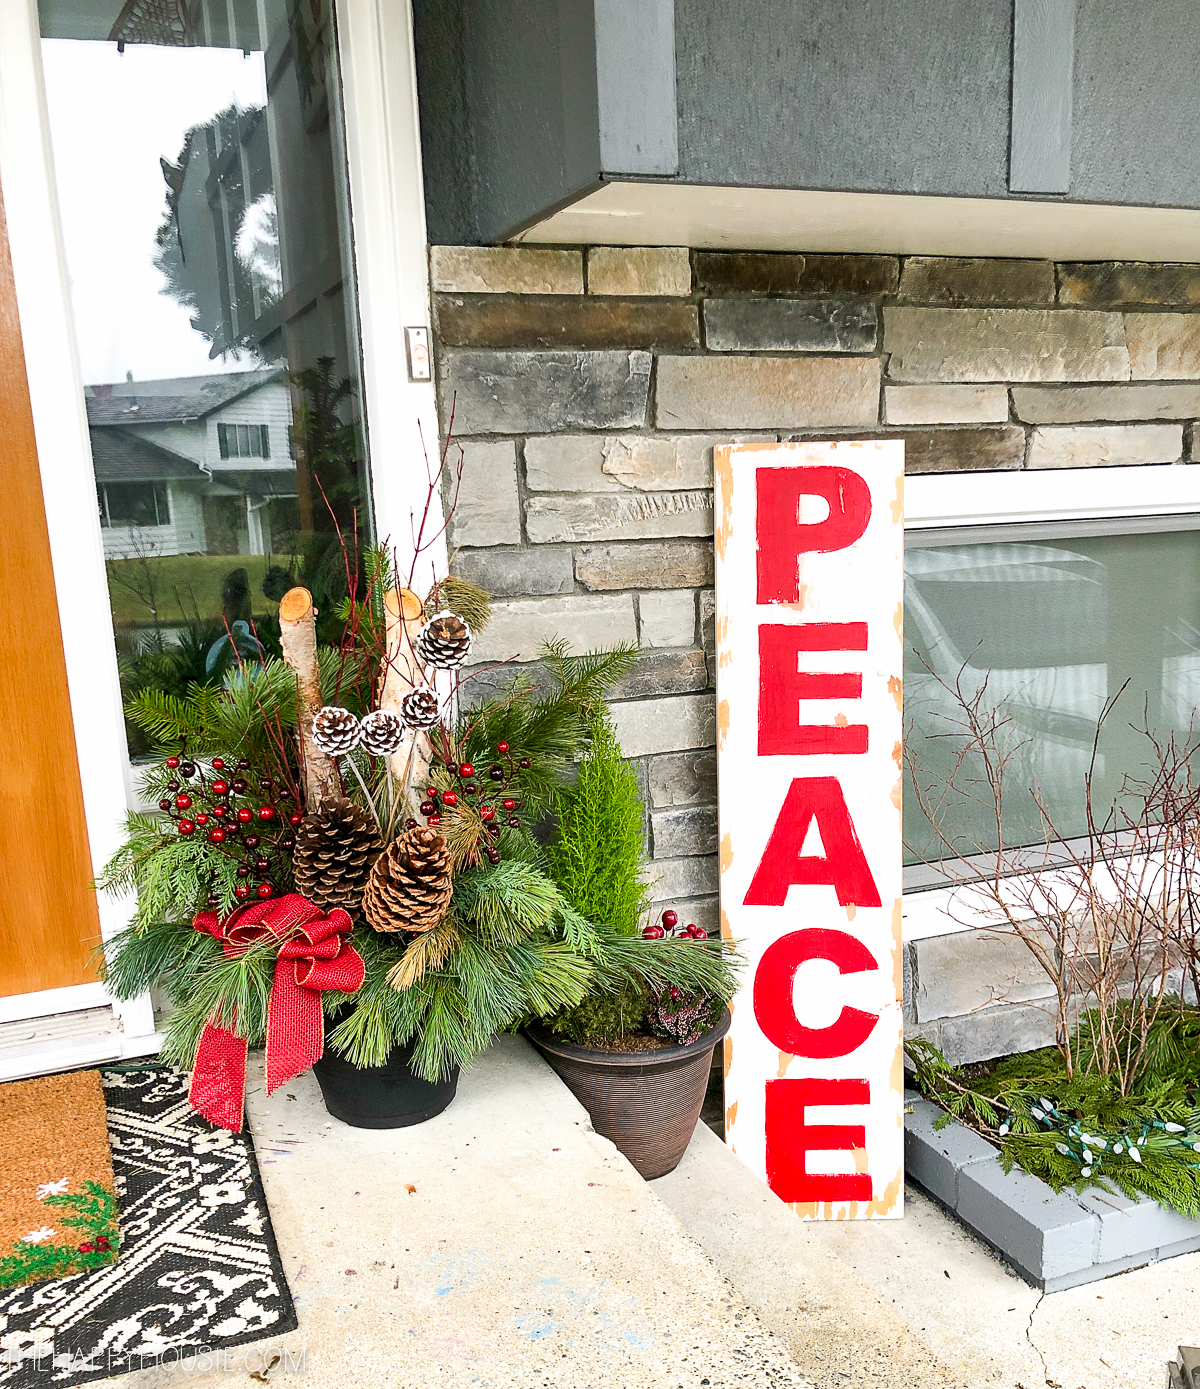 A peace sign next to the planters by the front door.